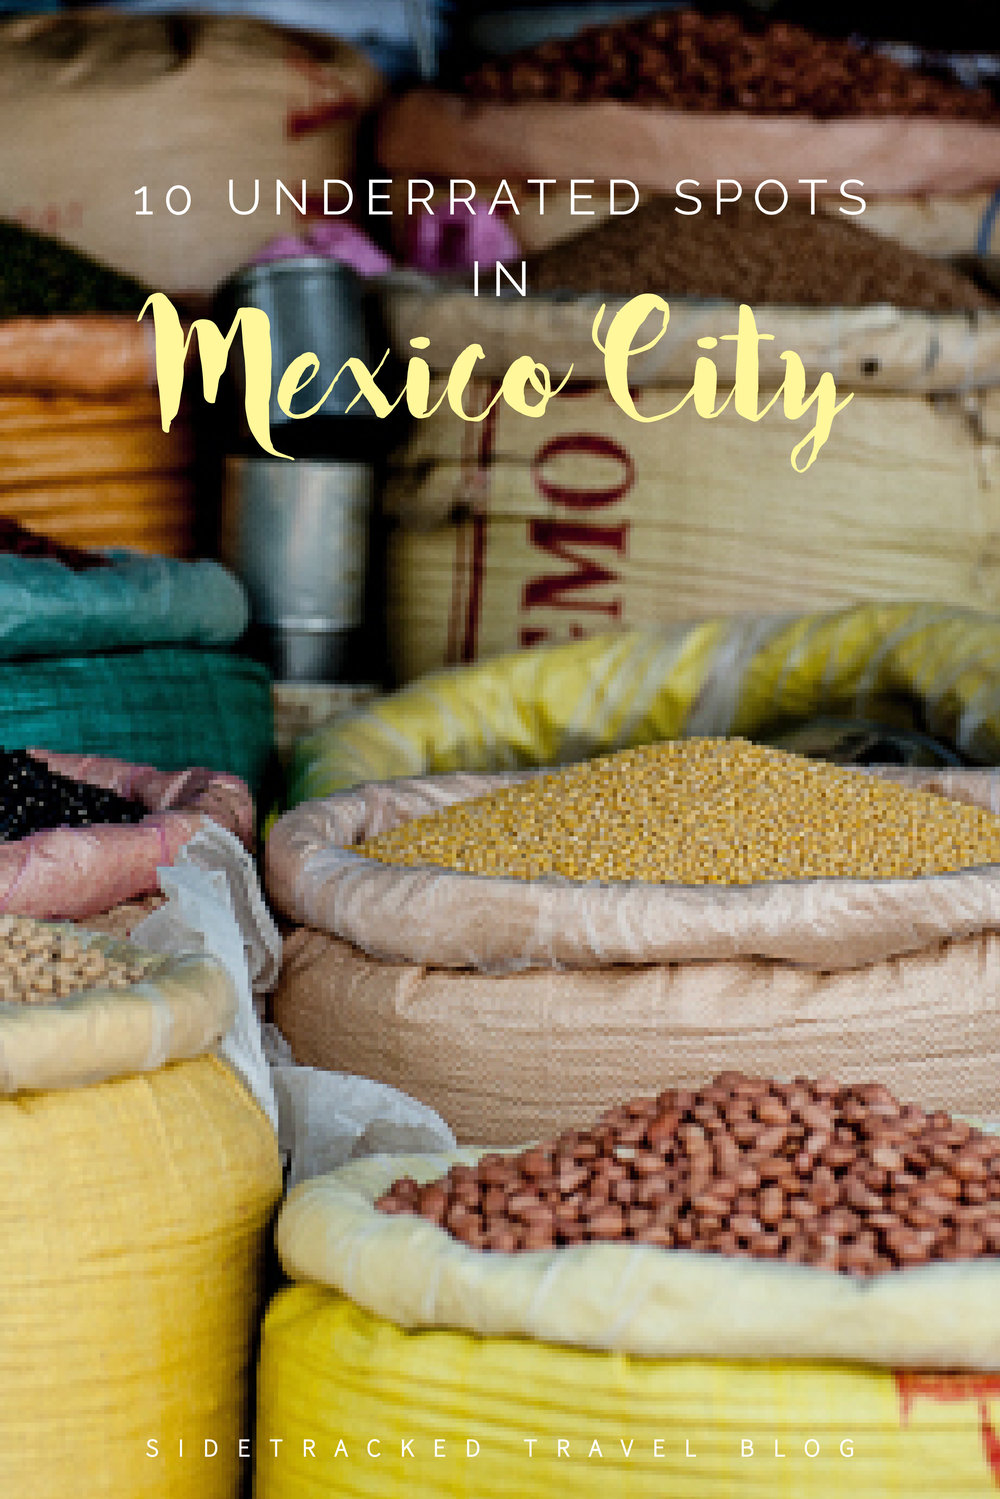  If you're in the midst of planning out your trip to Mexico City and feeling a bit overwhelmed by the world's tenth largest city, I've put together this list of 10 underrated spots well worth visiting. 